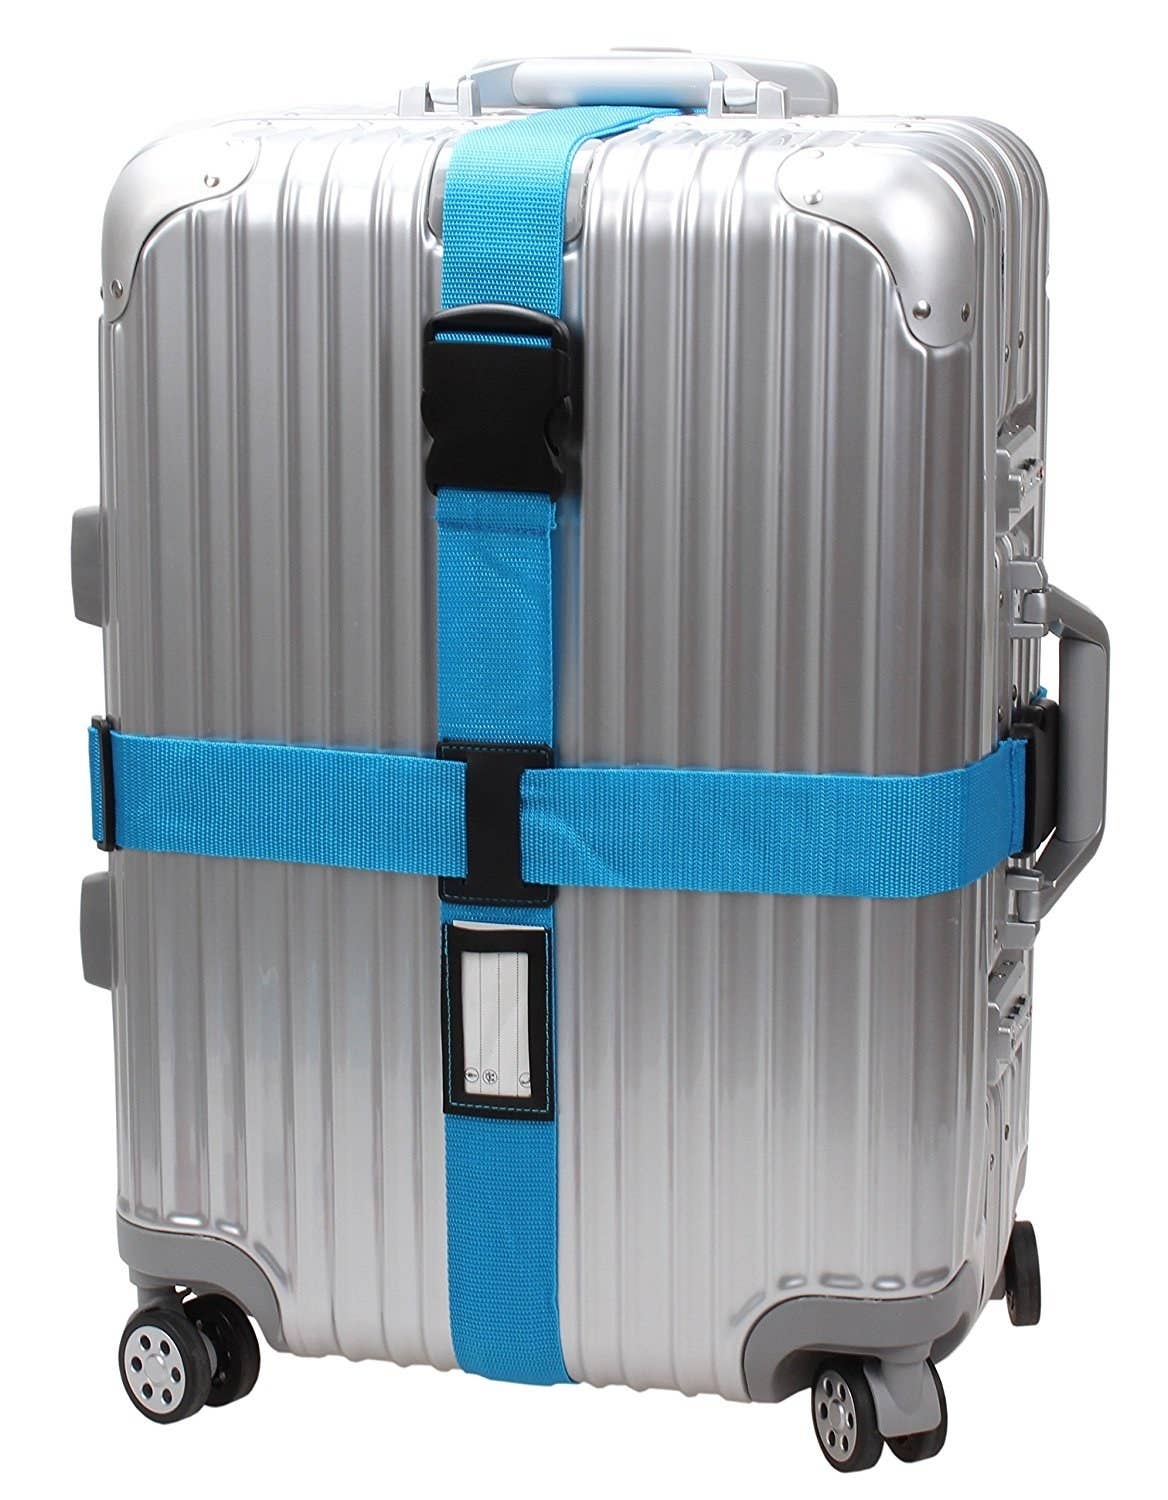 Best Luggage Accessories: Personalize Your Suitcase to Avoid Losing It